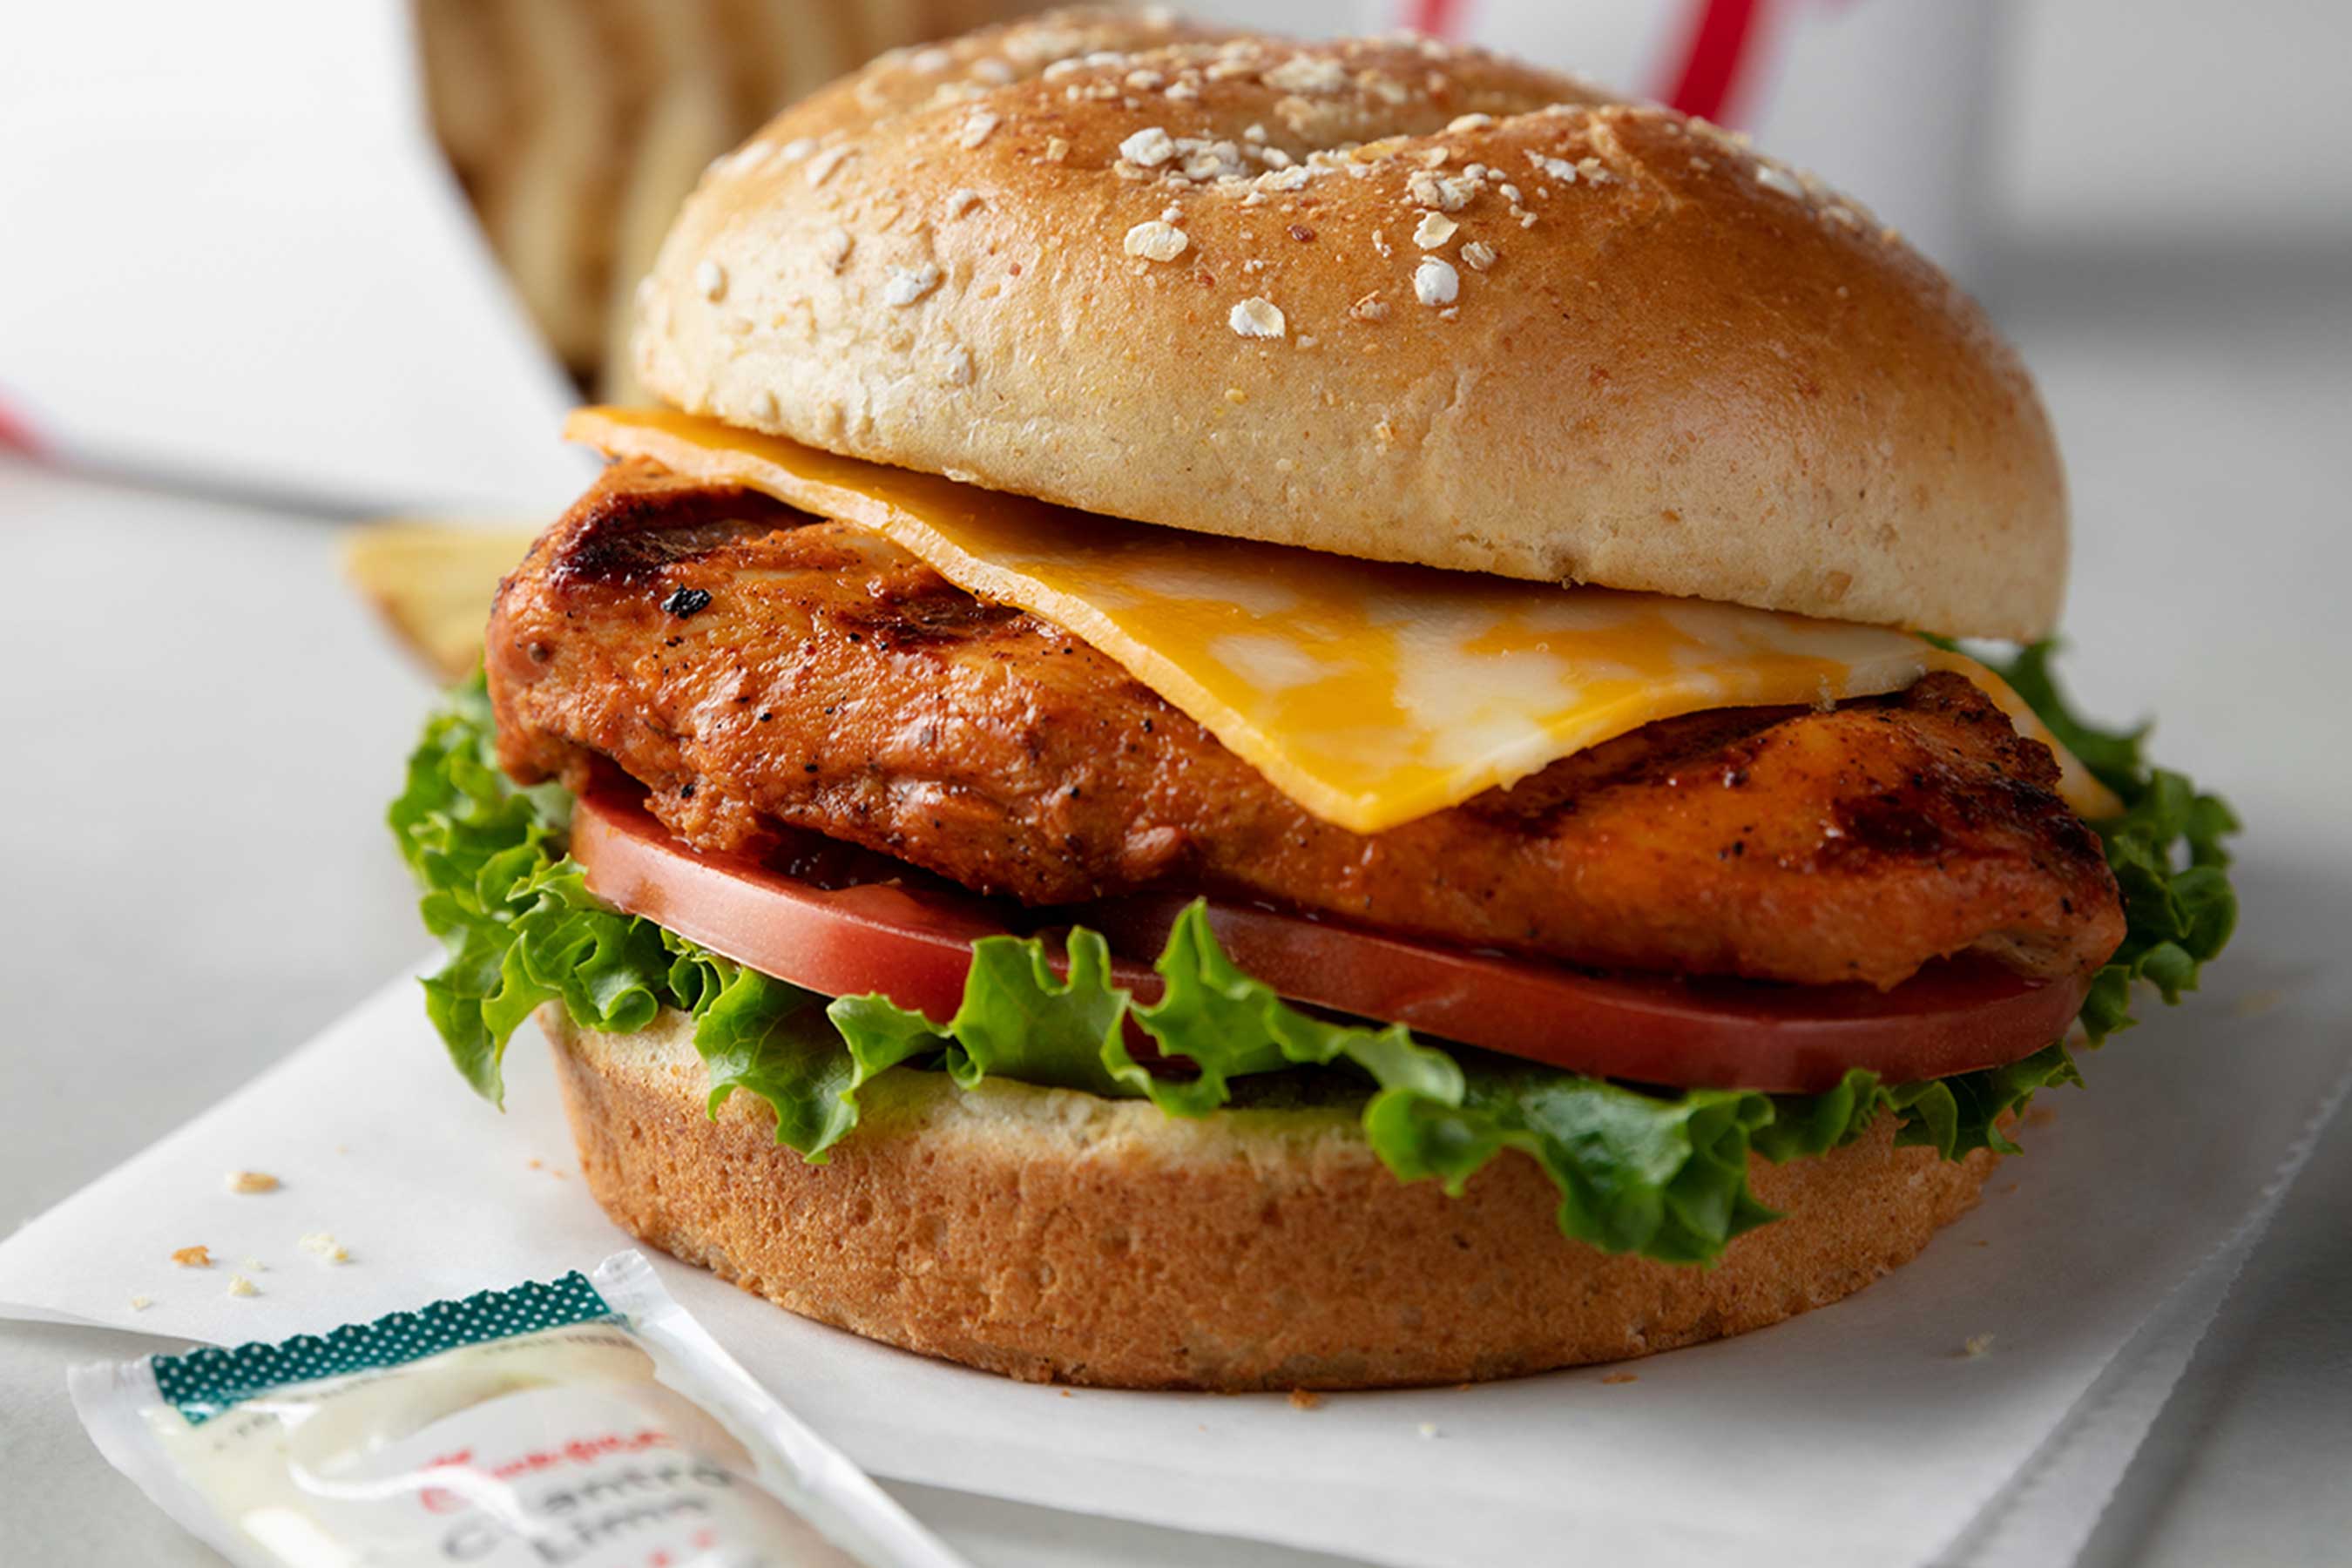 Chick-fil-A Grilled Spicy Chicken Deluxe Sandwich, available for a limited time at participating restaurants nationwide.